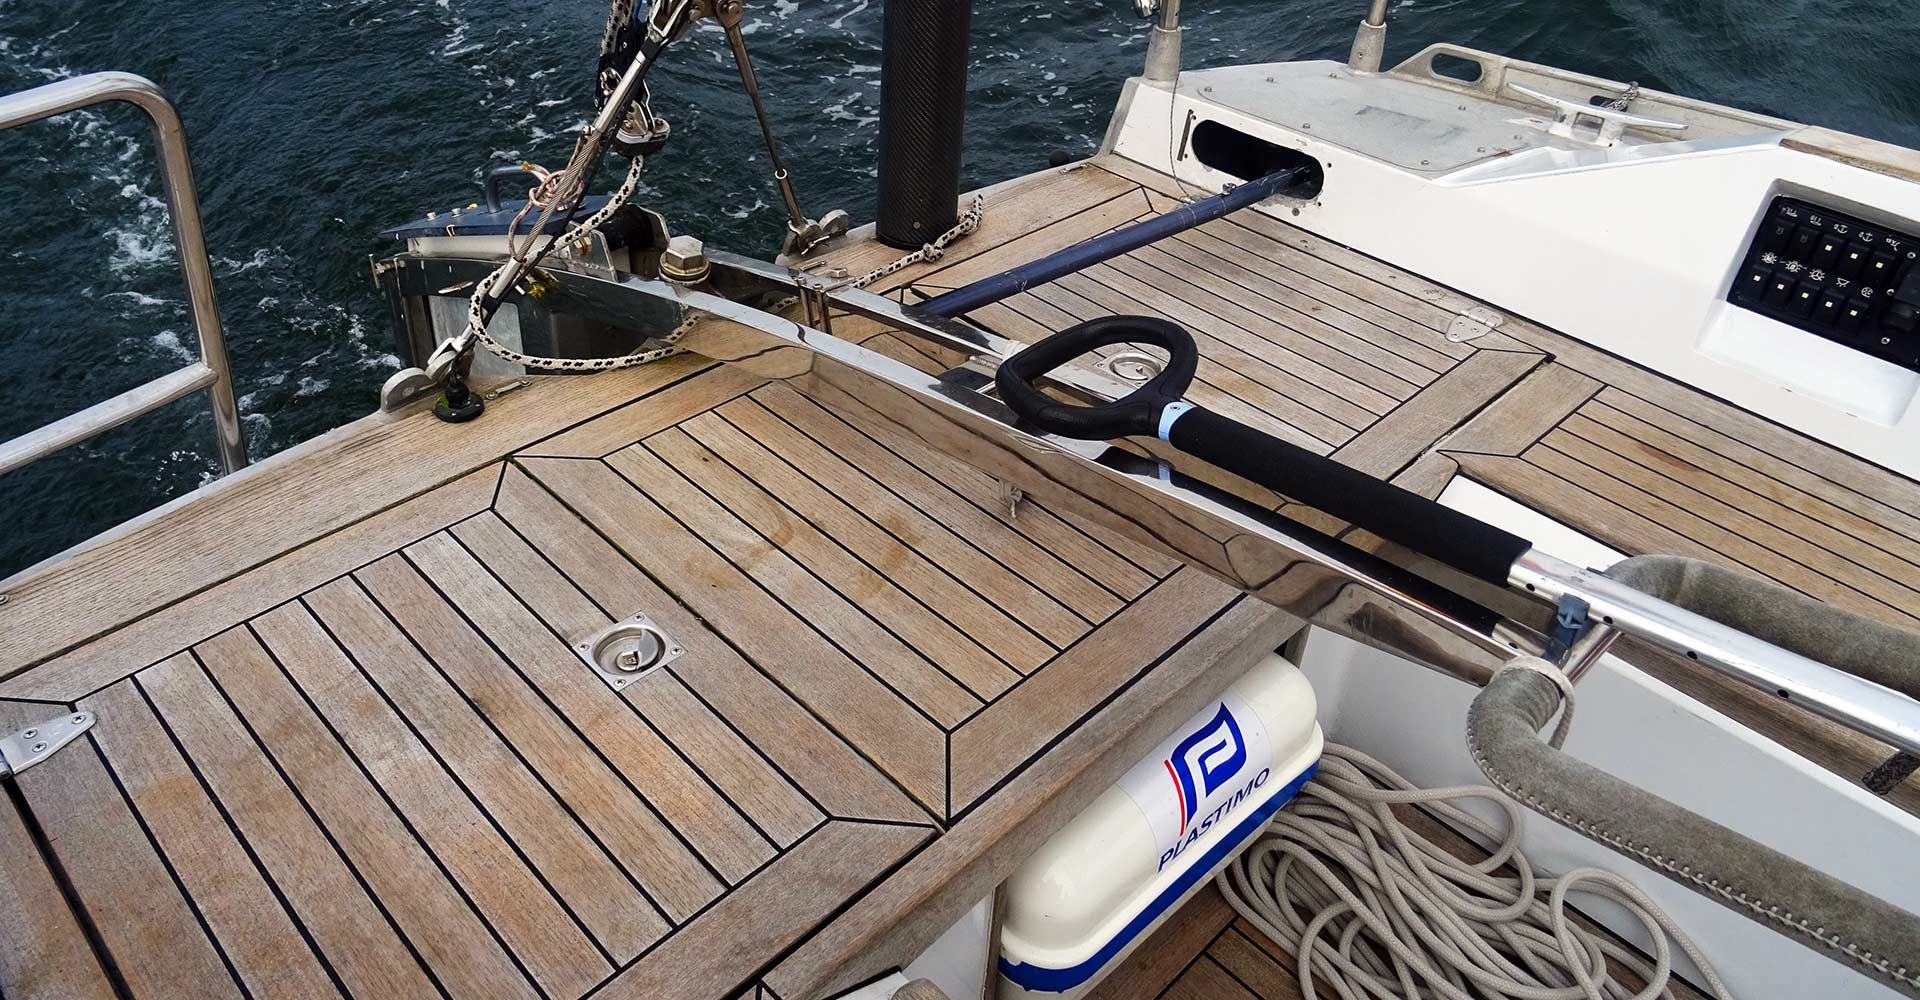 Harken Hoister 7803: The Most Reliable Winch for Sailboats